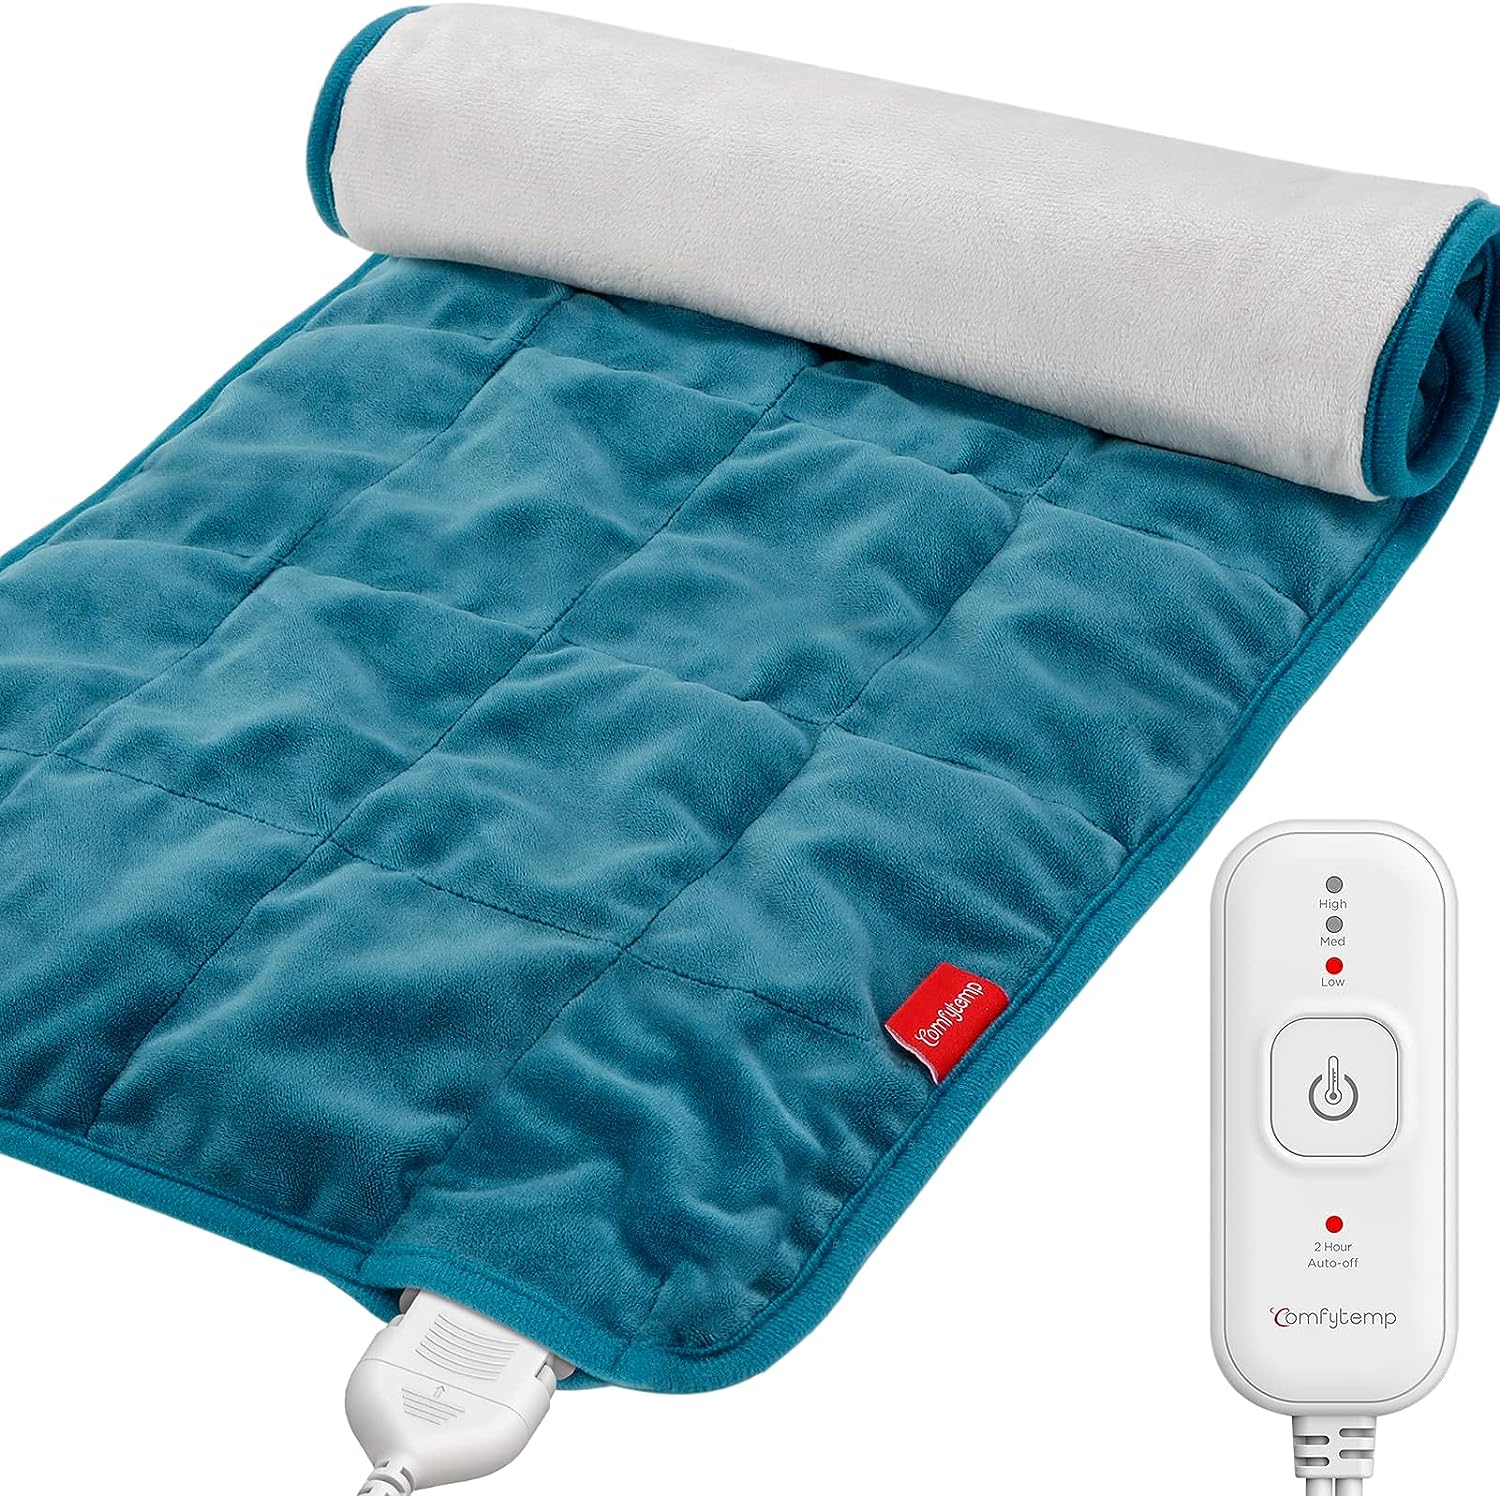 WeightedHeat™ Full Weighted Heating Pad